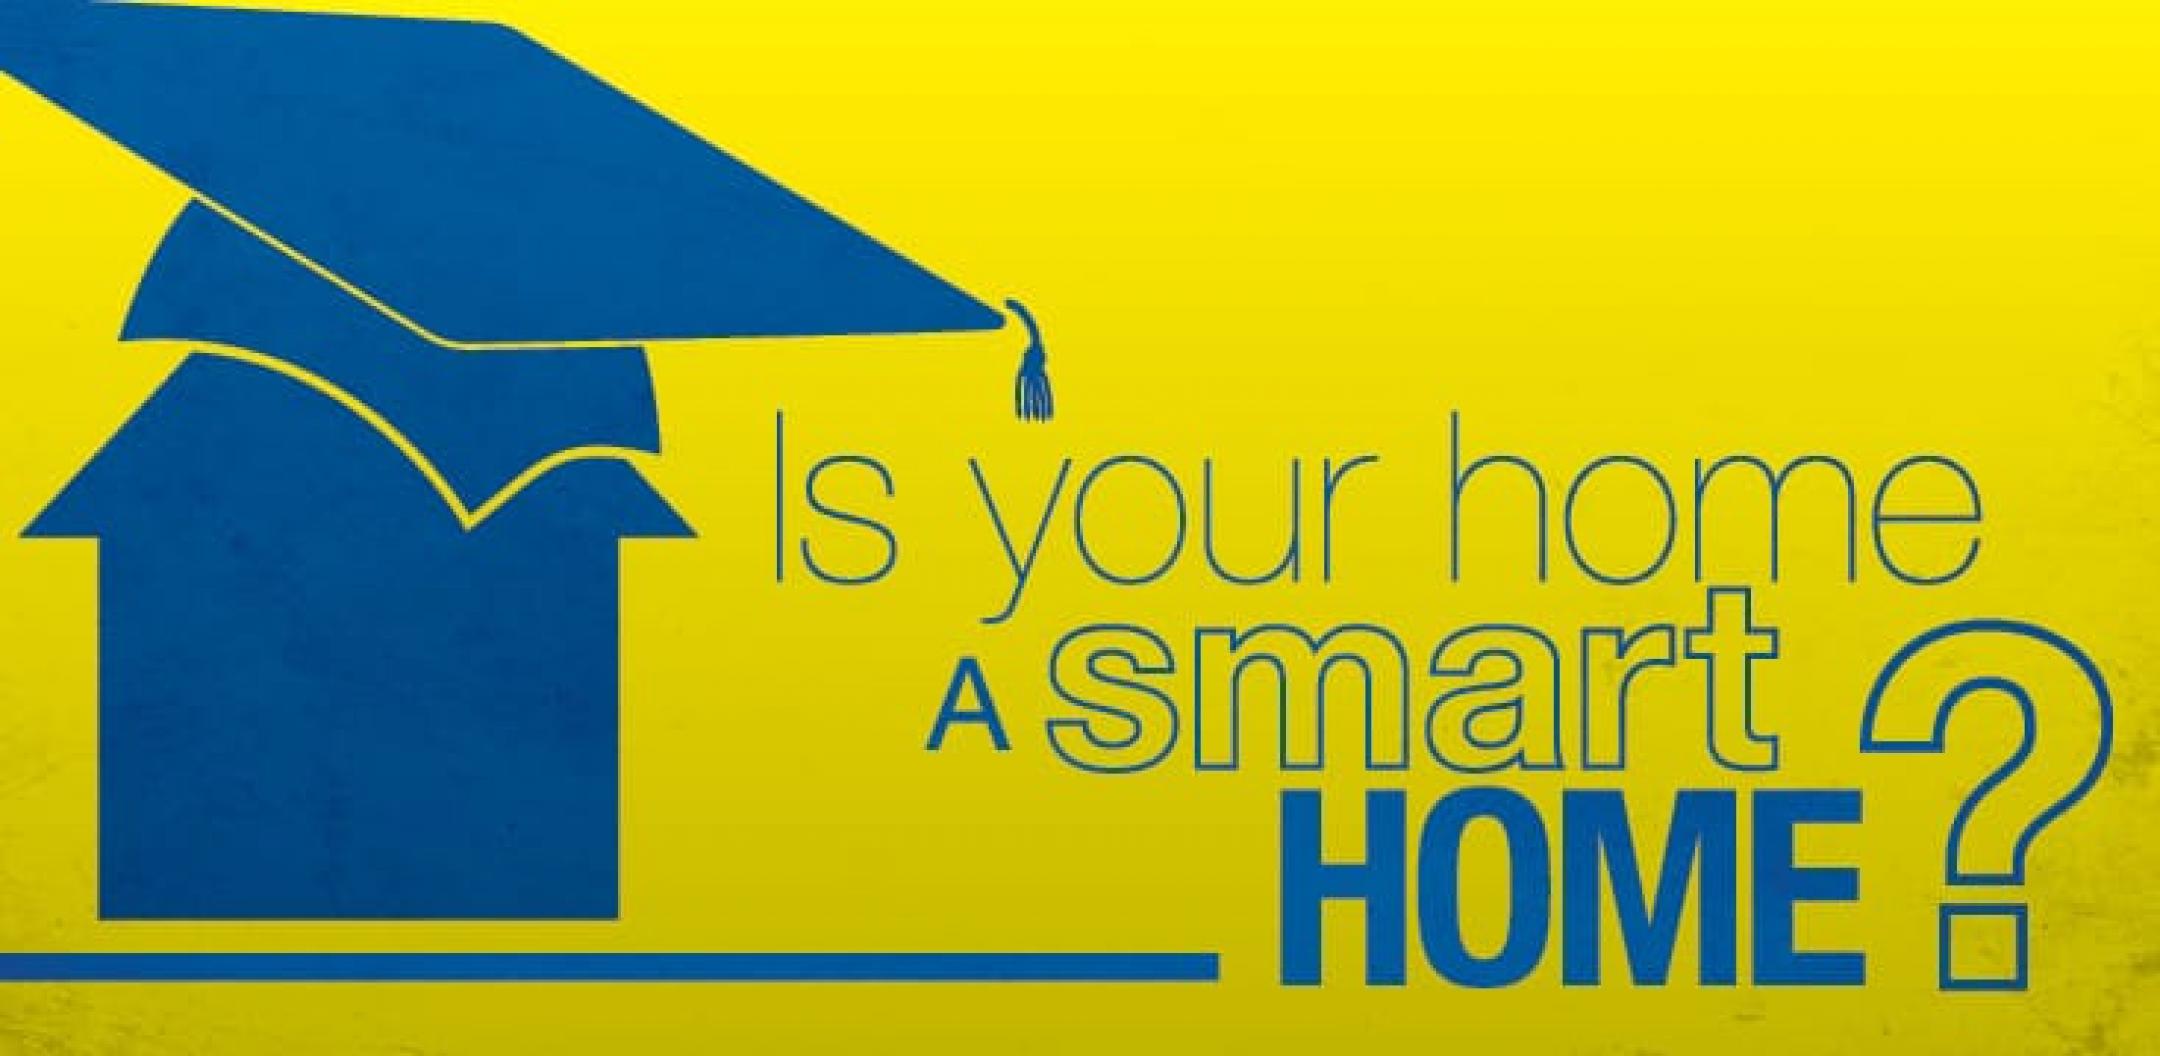 Is Your Home a “Smart” Home?